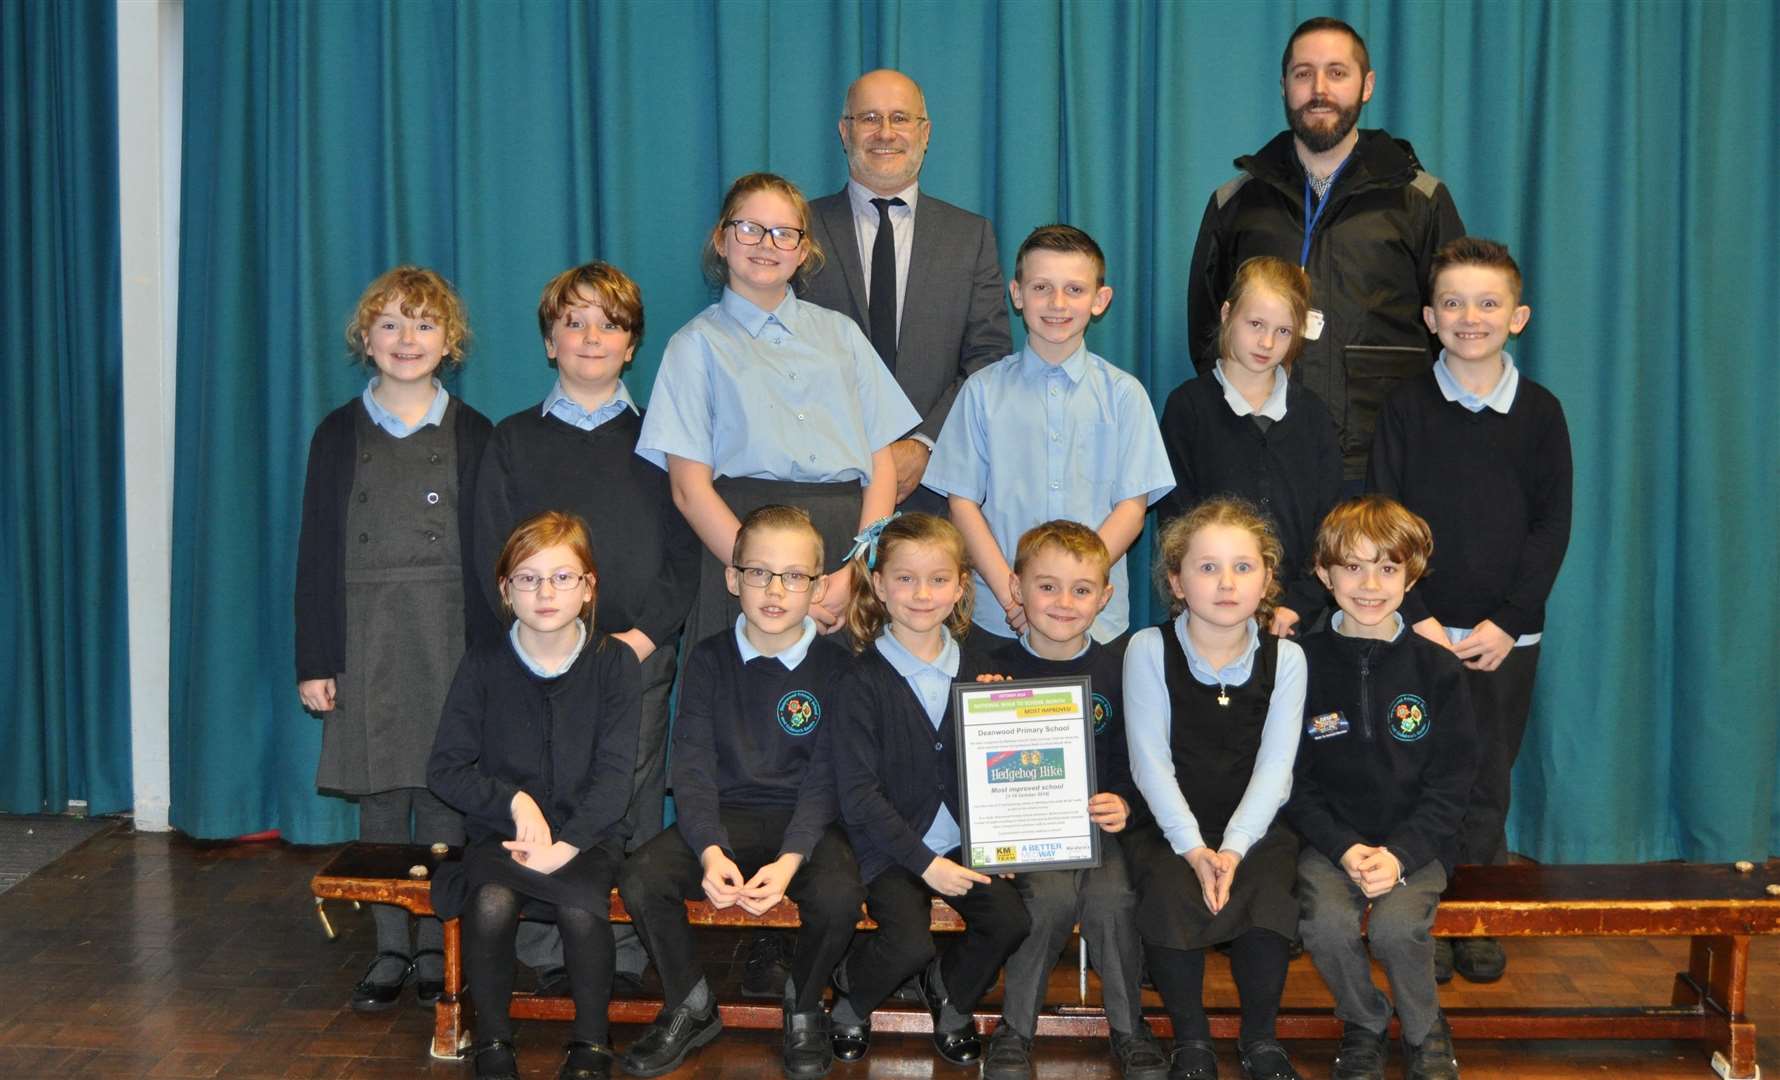 Deanwood Primary School in Rainham were named the most improved school for Walk to School Month.